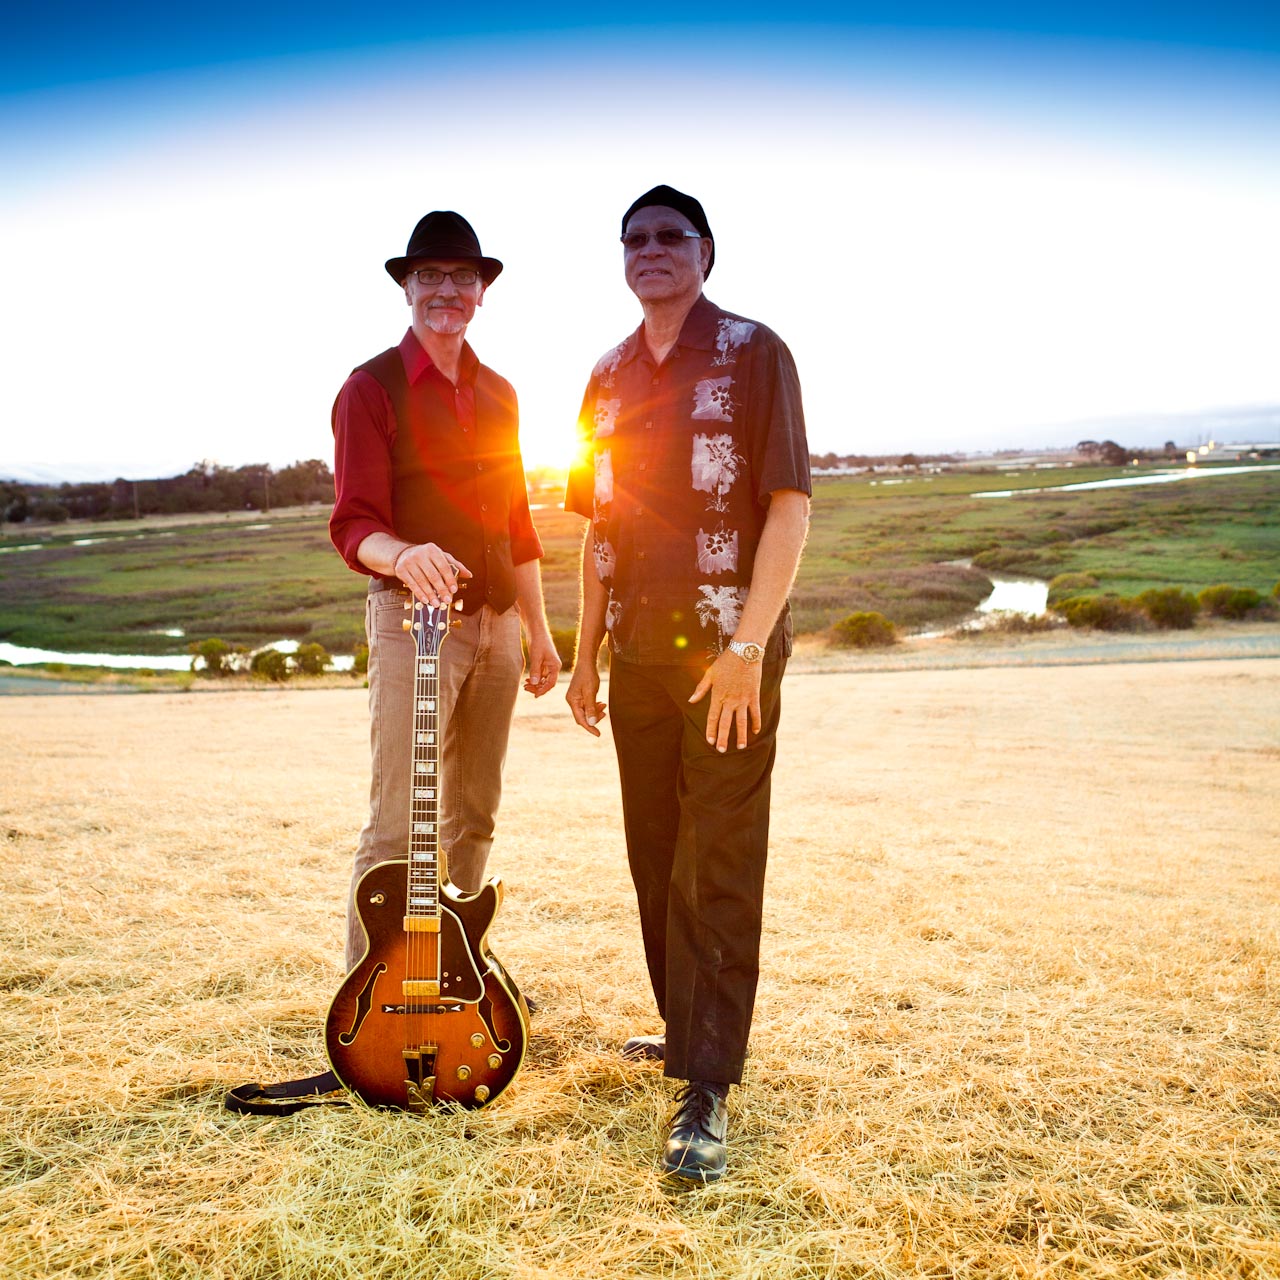 Nate Pruitt and Rick Vandivier with a guitar in a field.